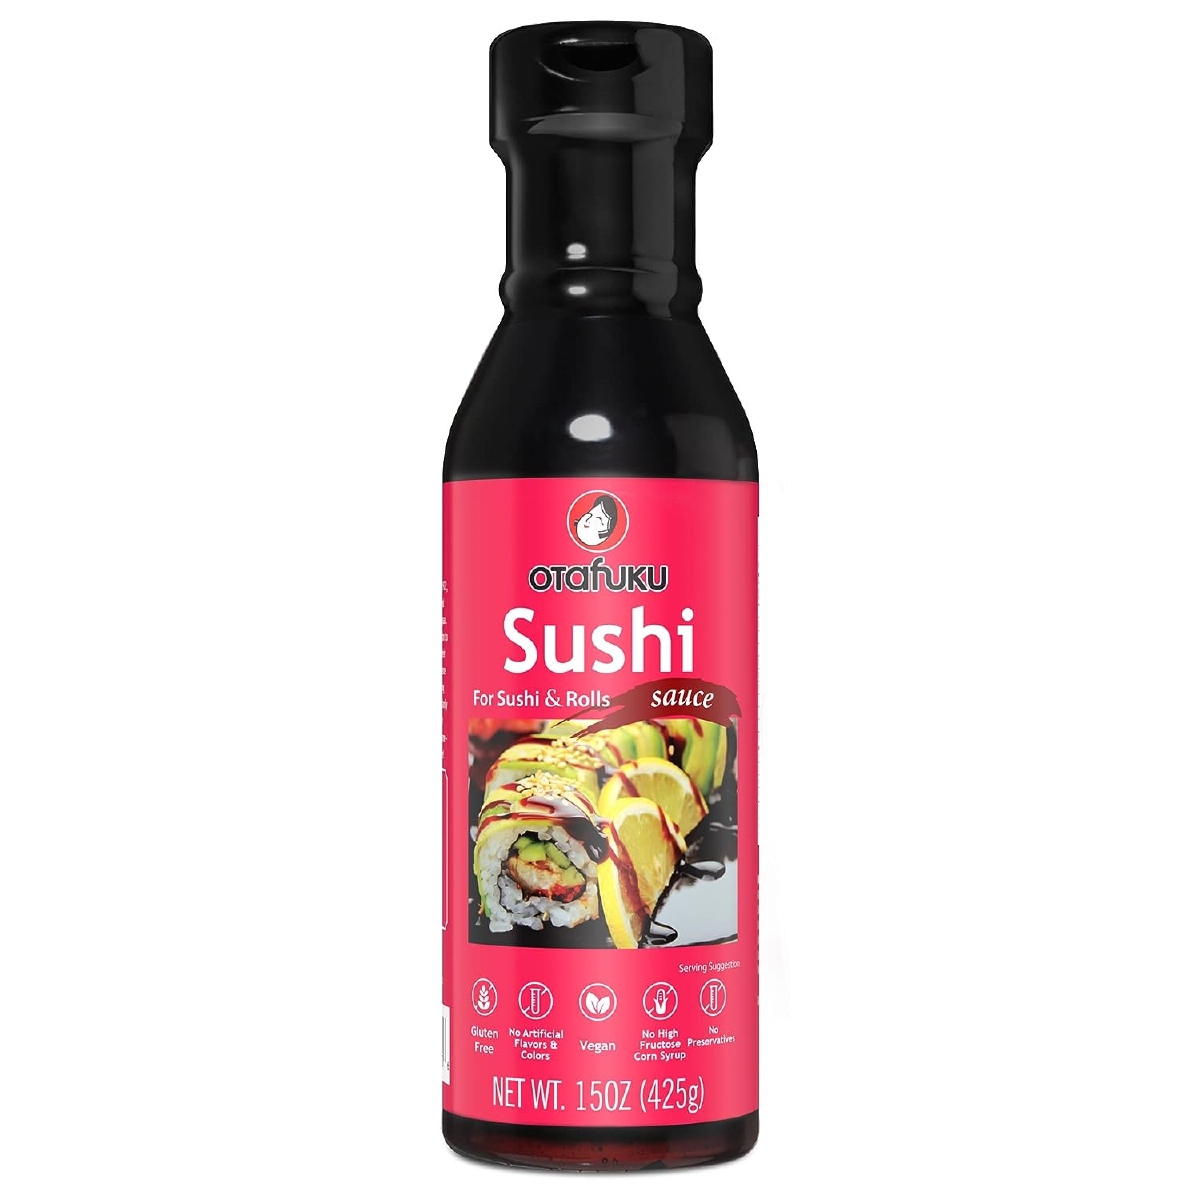 Dark glass bottle of Otafuku Sushi Eel Sauce with pink label on the white background.